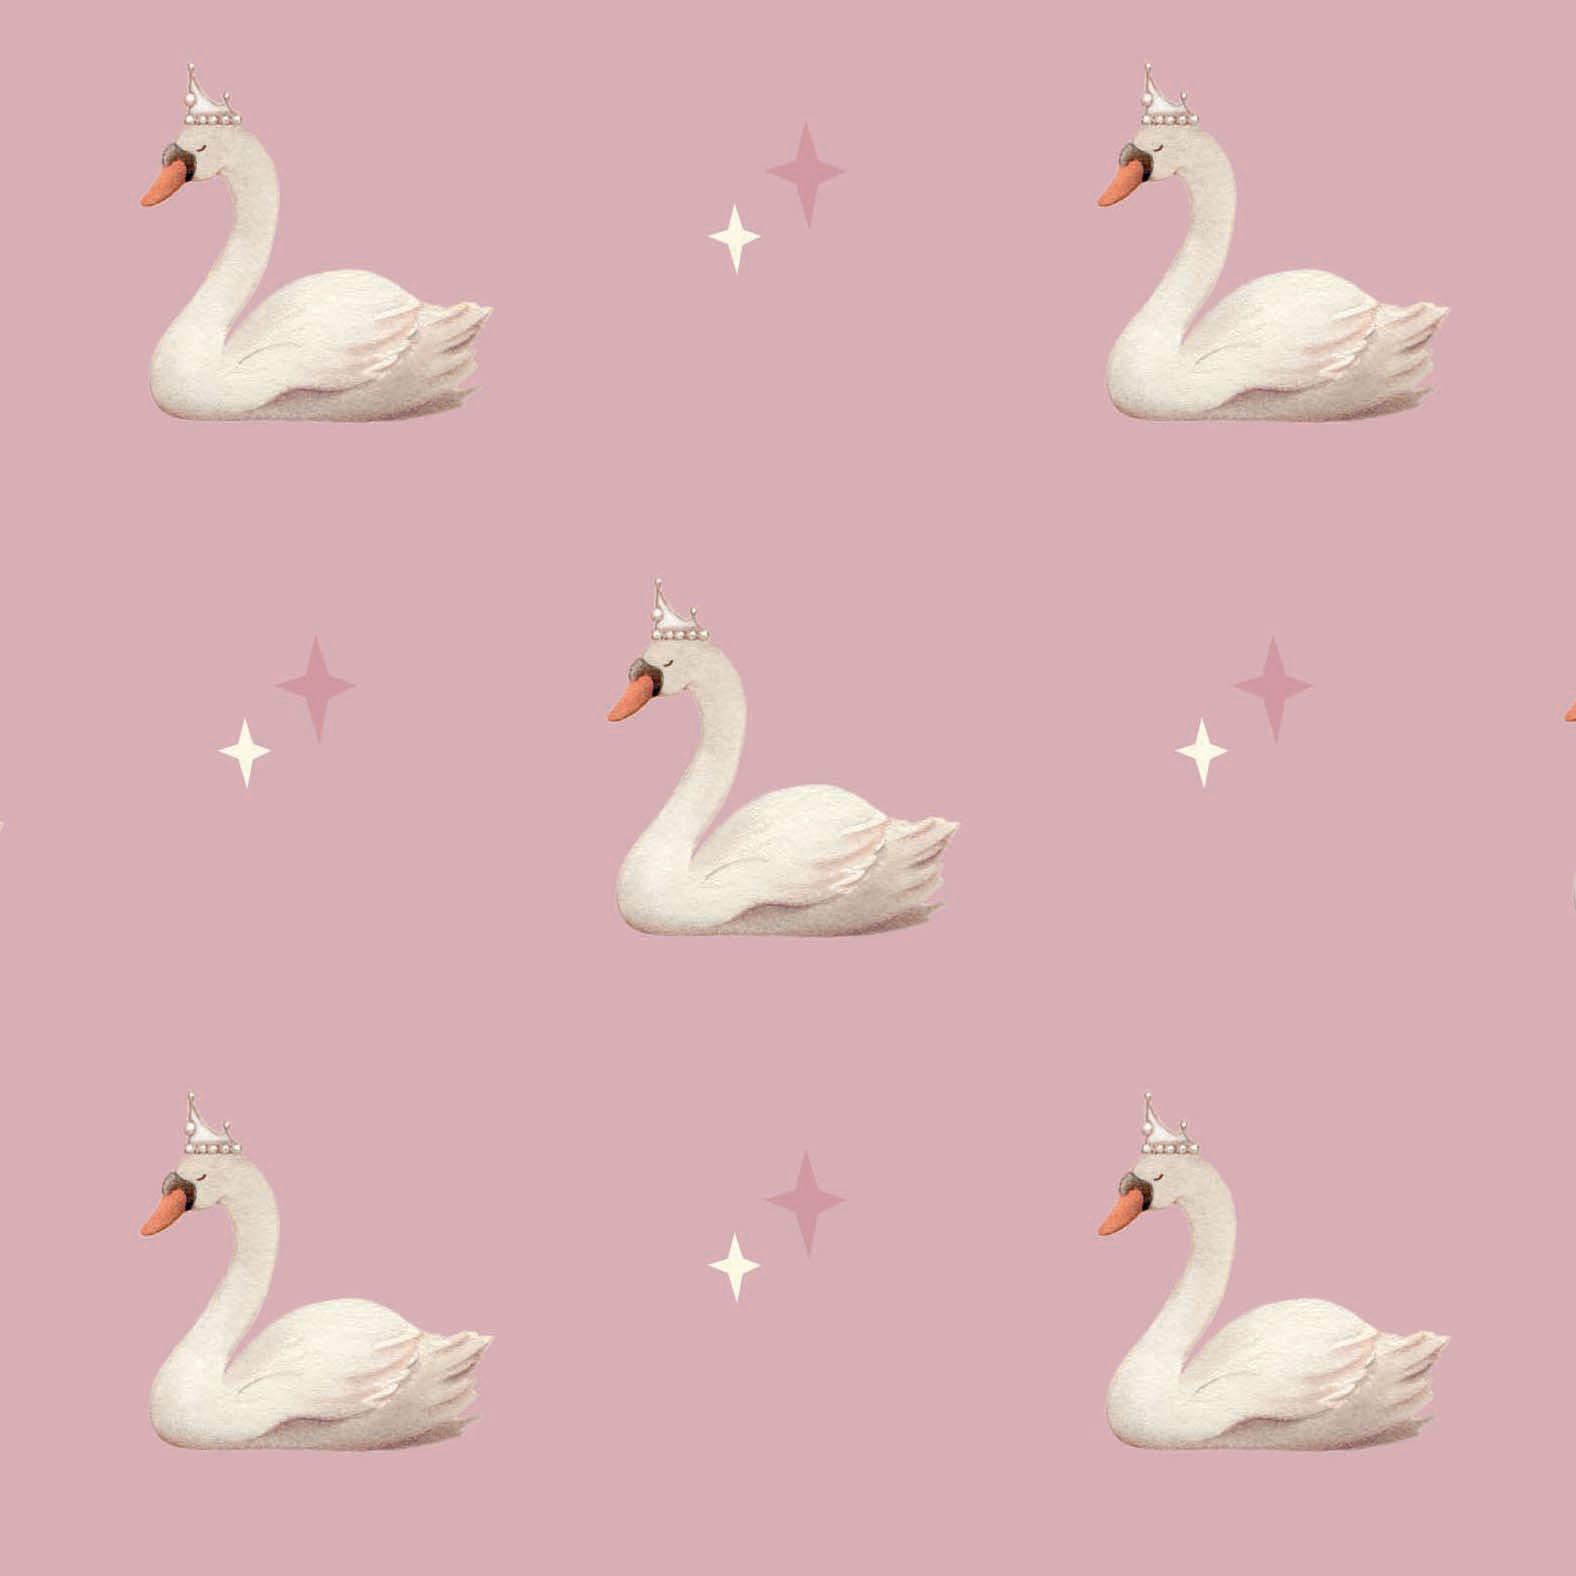 Gift Wrap featuring cute swan wearing a tiara on a dusky pink coloured wrap.